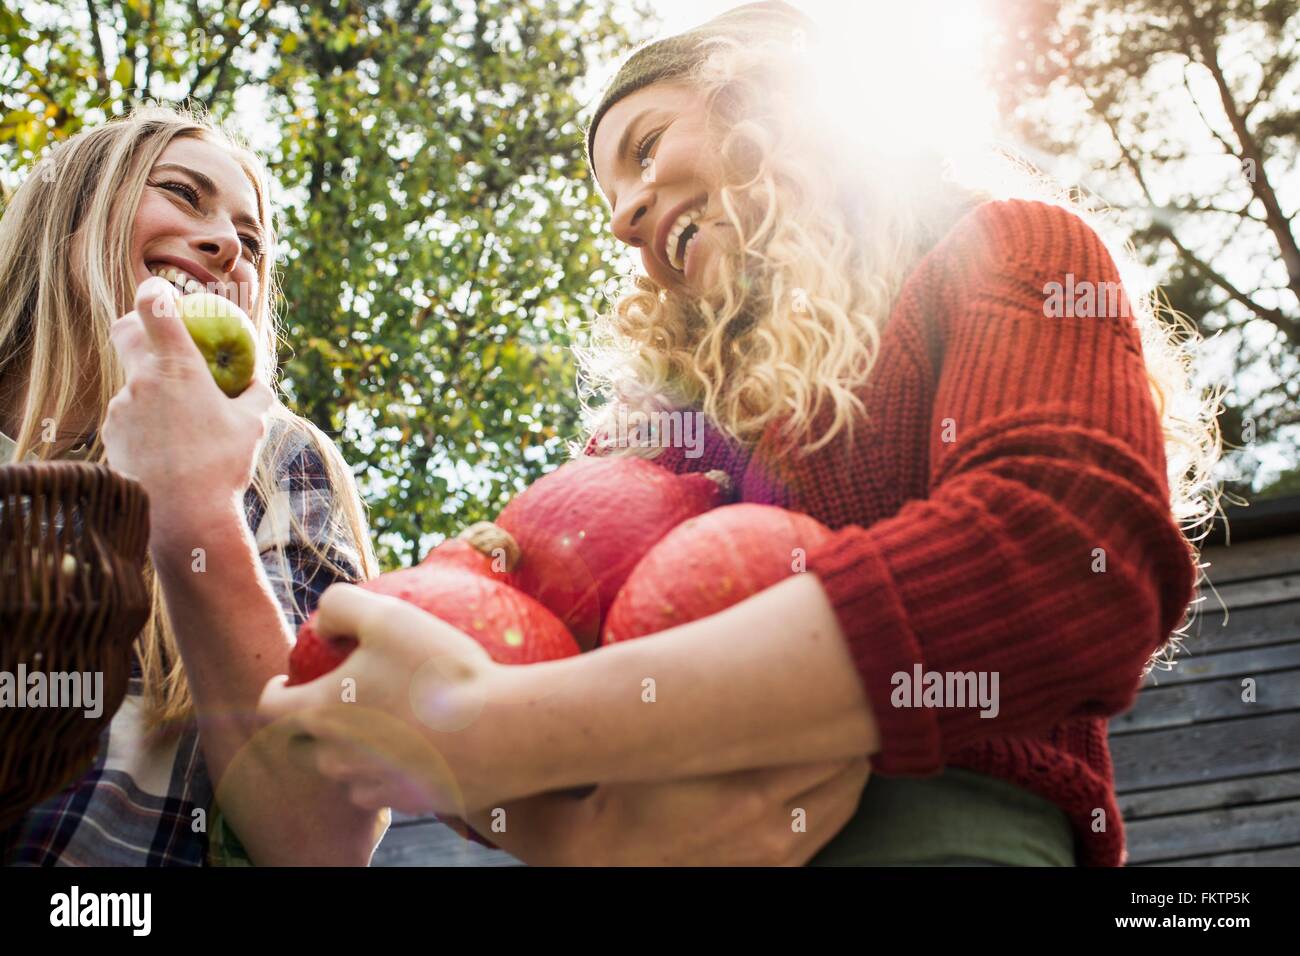 Two women holding homegrown produce, low angle Stock Photo